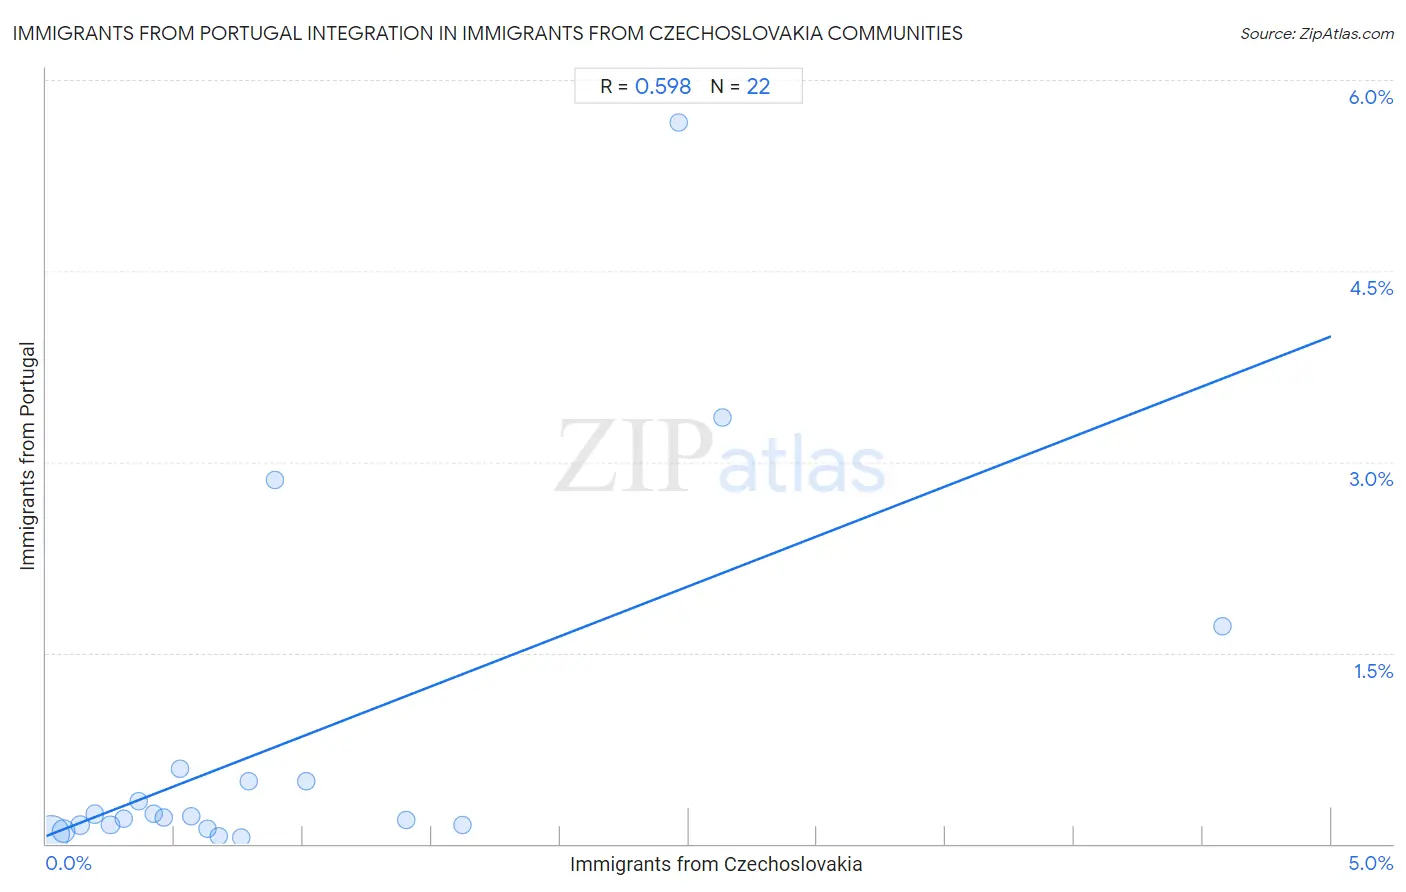 Immigrants from Czechoslovakia Integration in Immigrants from Portugal Communities